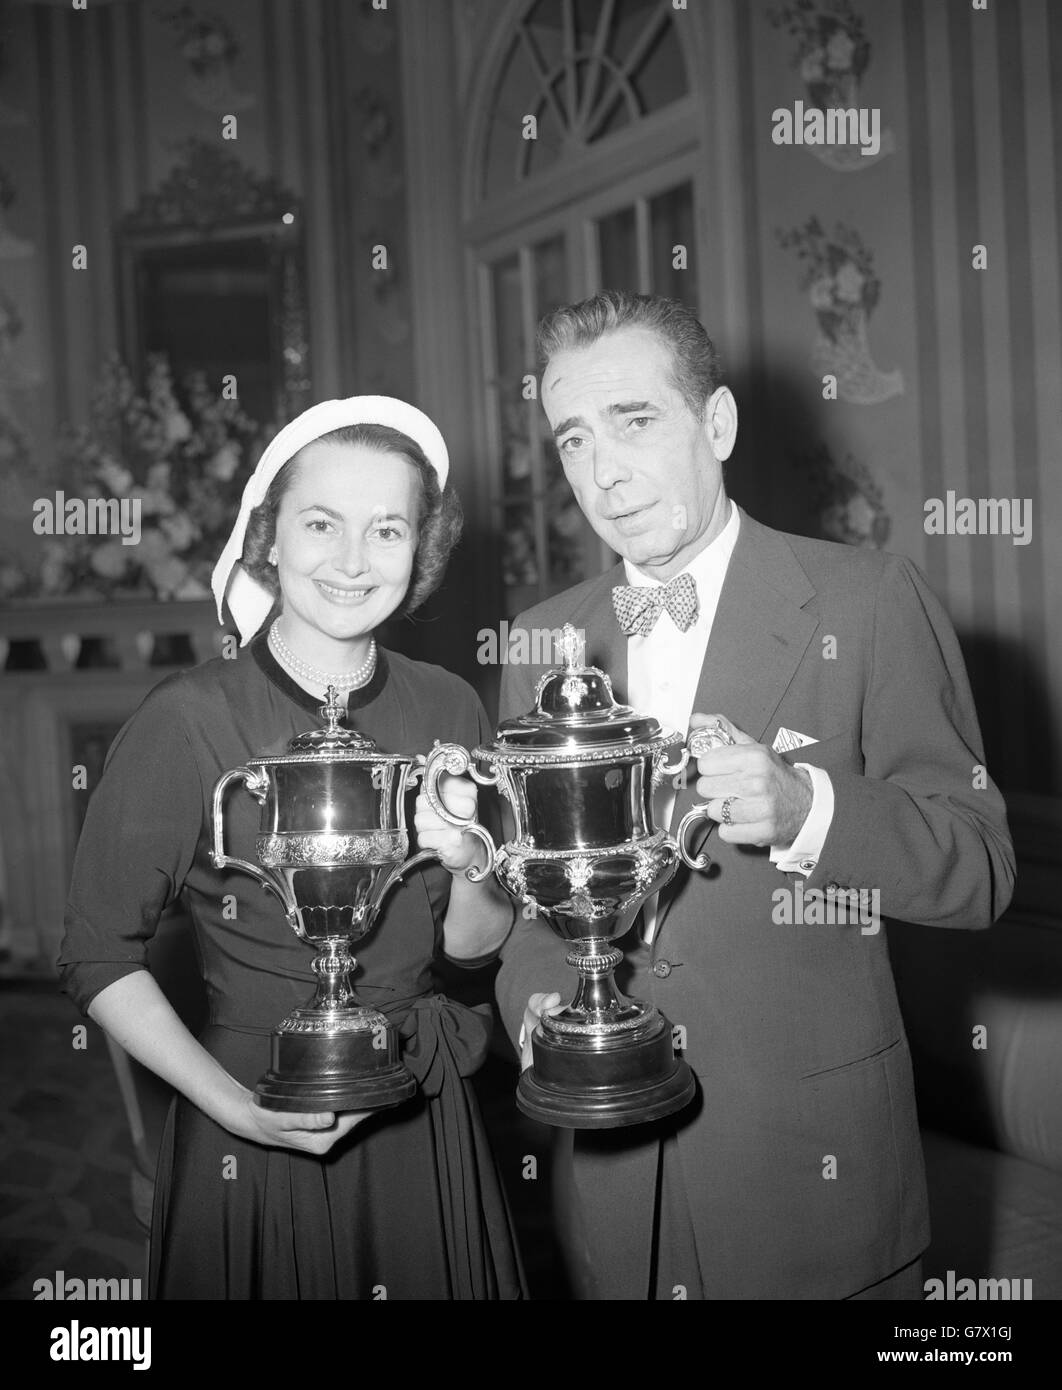 Film actor Humphrey Bogart at the Savoy Hotel with the 1952 Picturegoer Film Award for his performance in The African Queen. With him is Olivia de Havilland, who received the actress award on behalf of Susan Hayward. Stock Photo